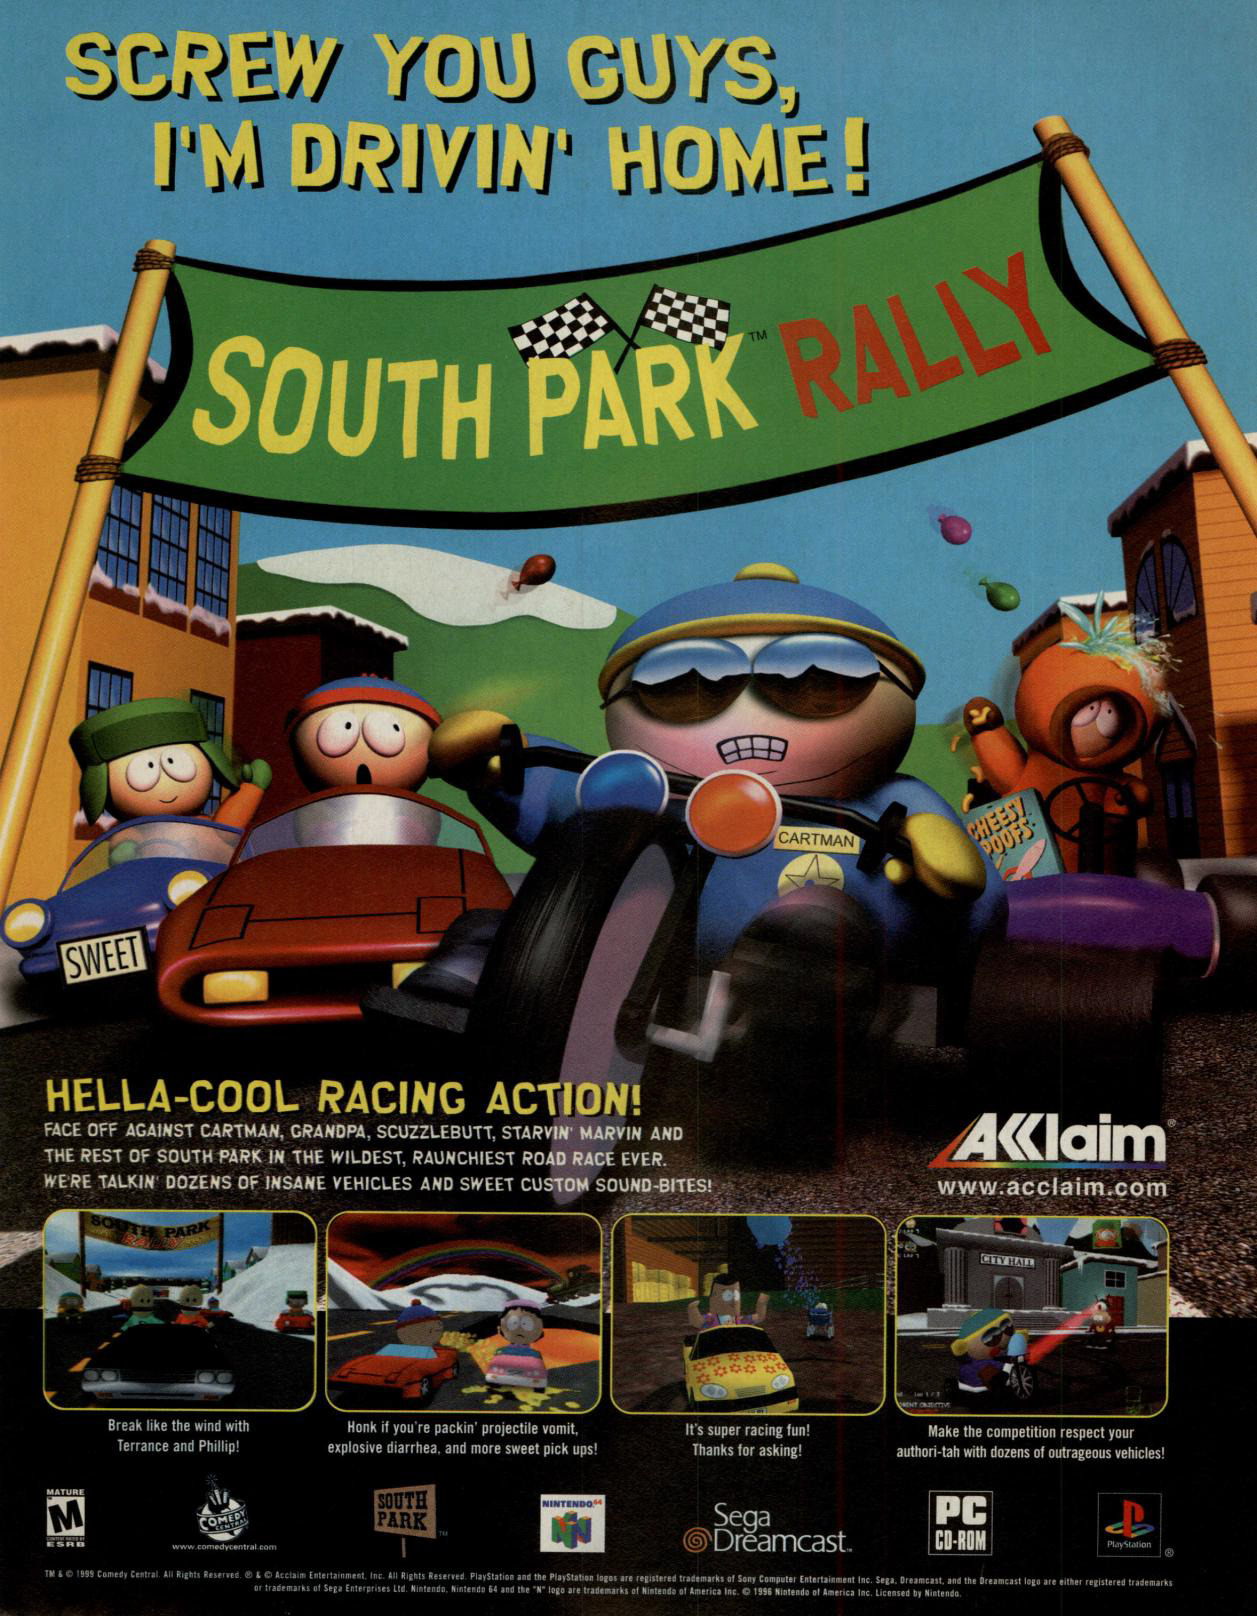 South Park Rally
“Screw you guys, I’m driving home!” (Incite Video Gaming #2, Jan. 2000)